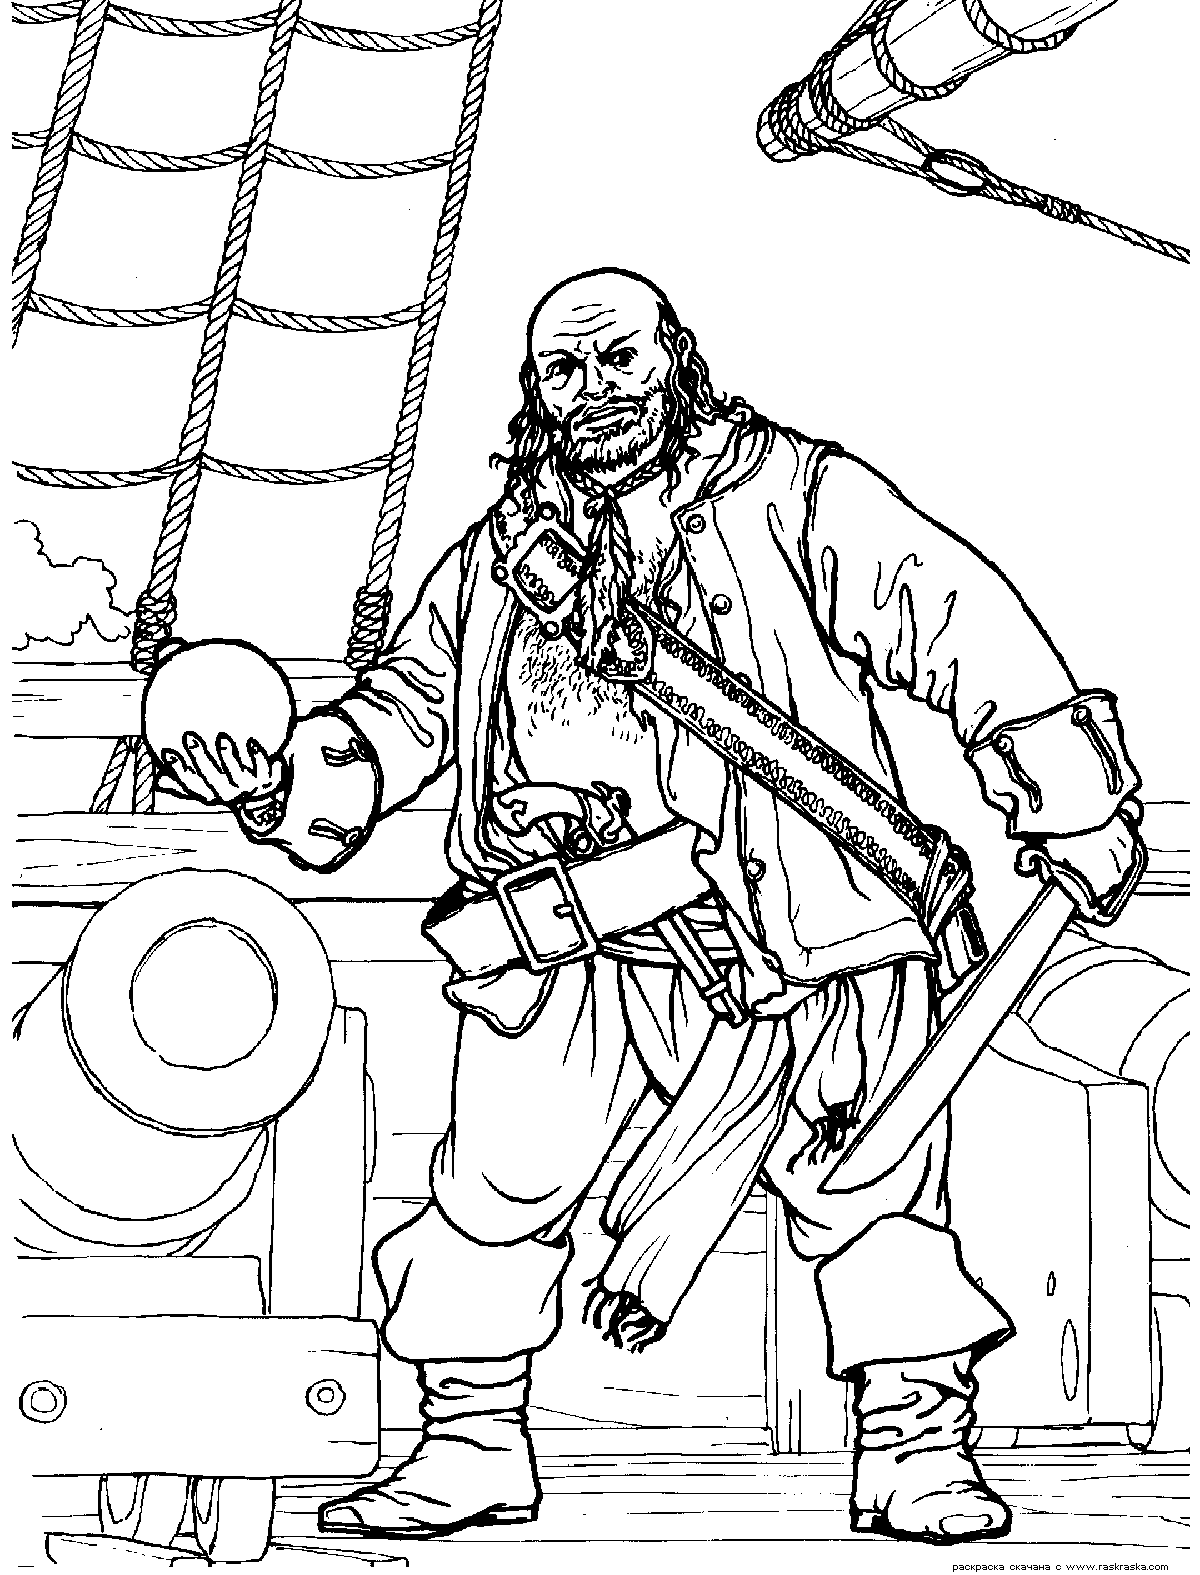 Pirate difficult Pirates Coloring pages for kids to print & color